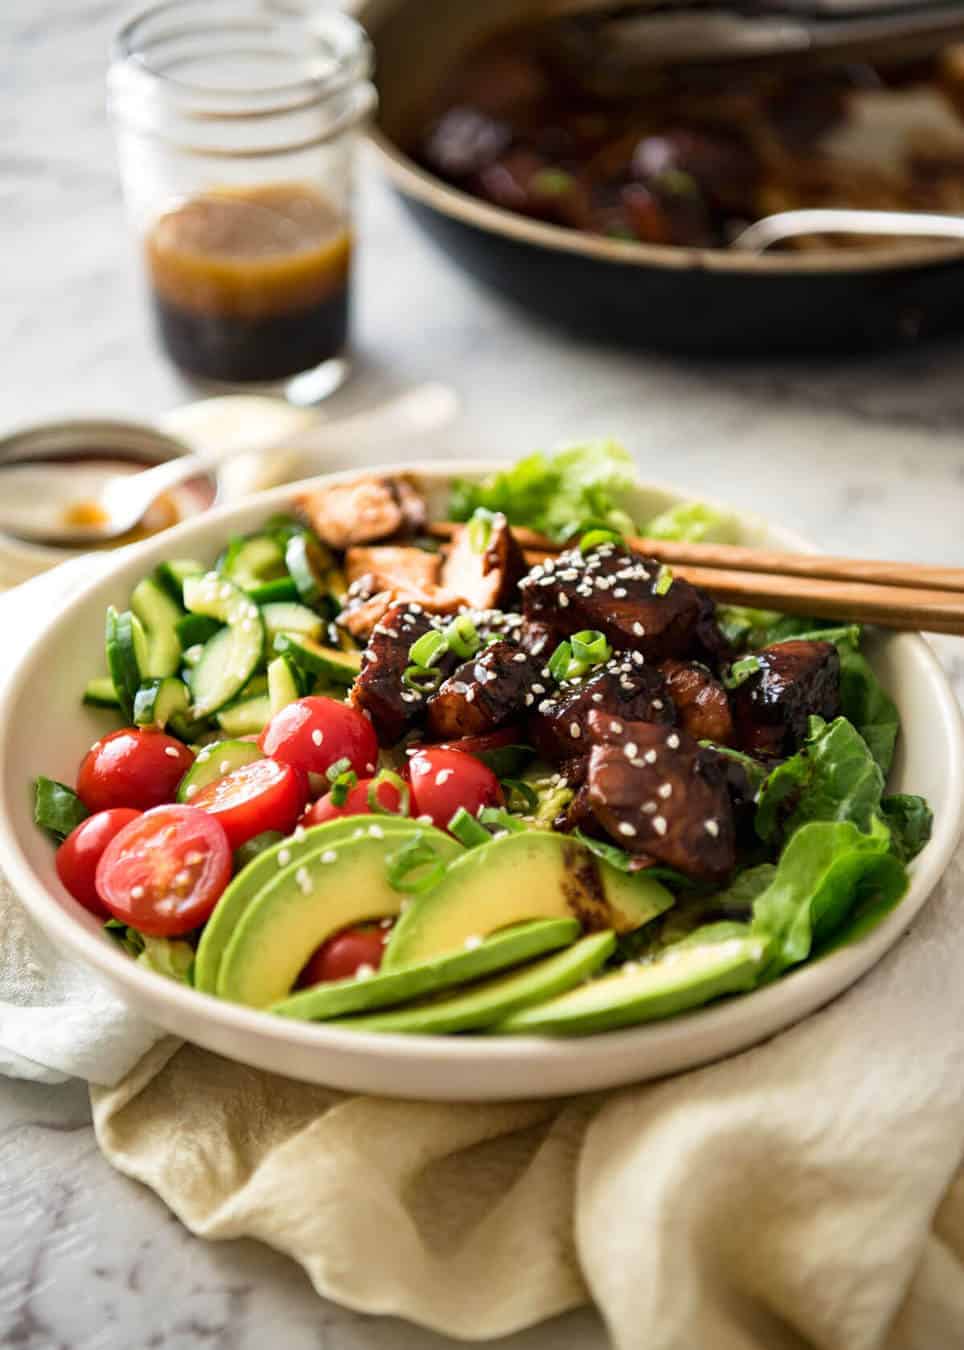 Asian Salmon Salad - Salmon dripping in a gorgeous Asian glaze on a fresh, vibrant salad drizzled with sesame dressing. Quick to make, packed with serious flavour! www.recipetineats.com